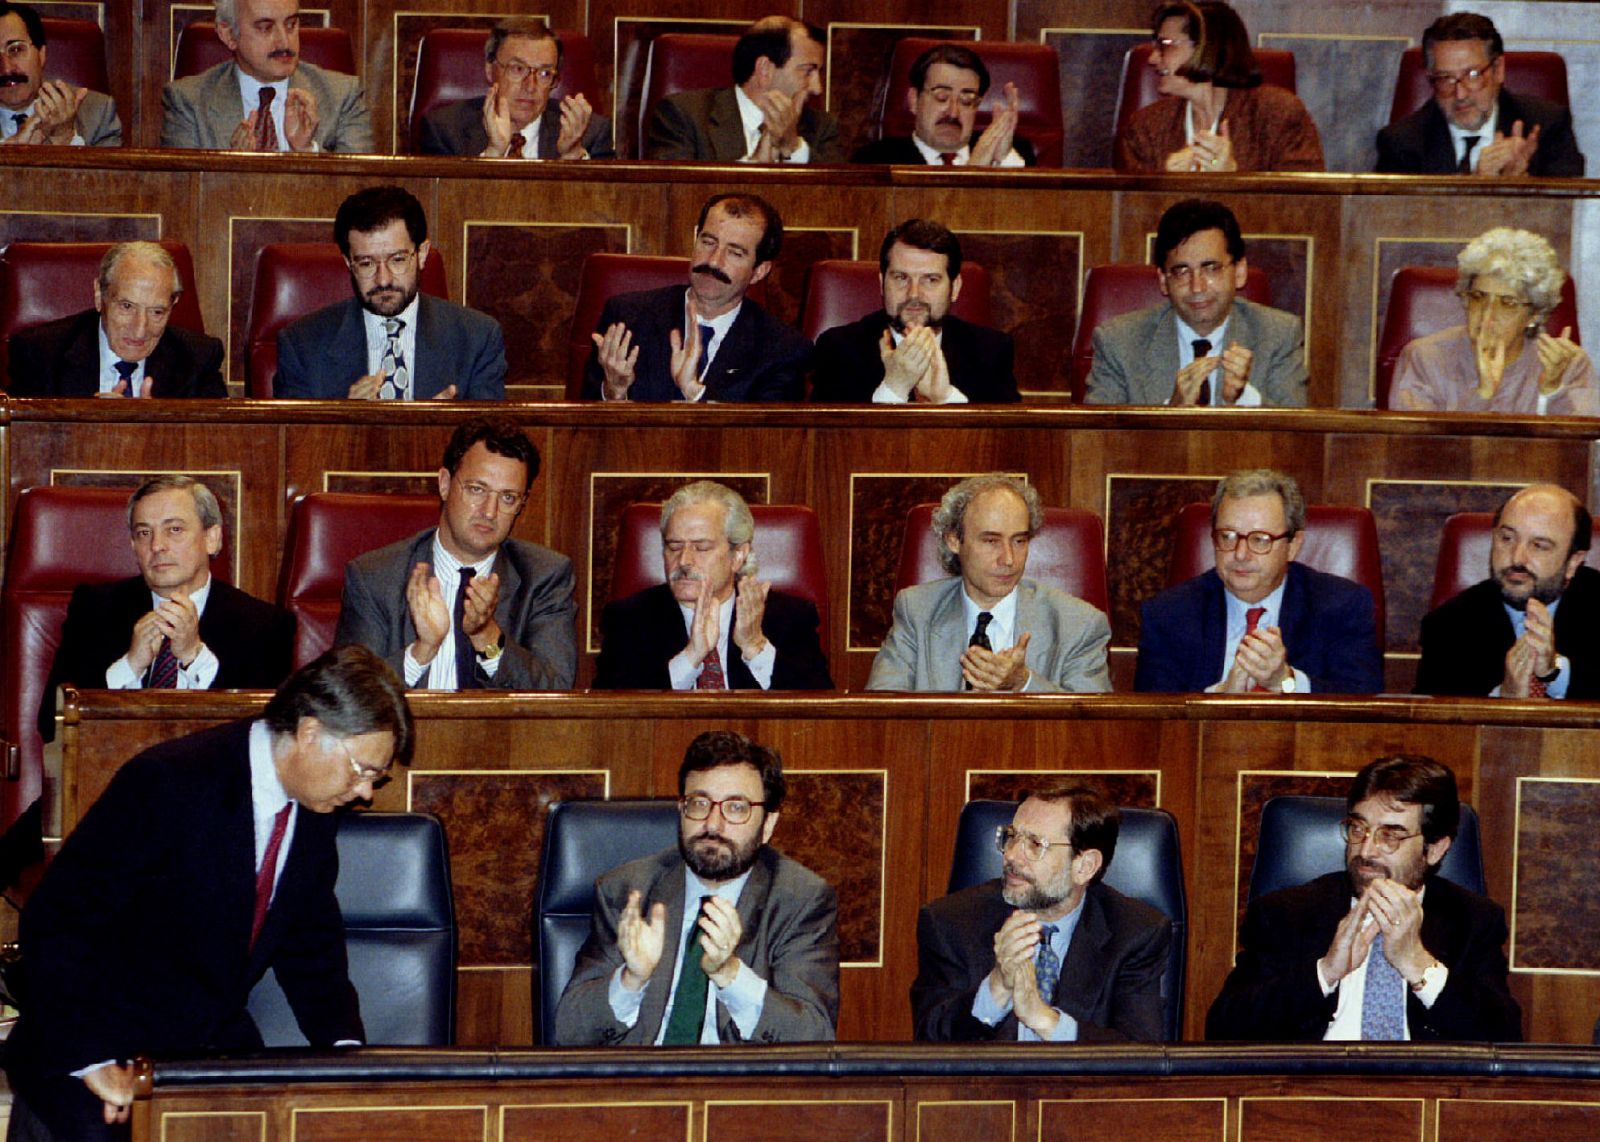 SPANISH PRIME MINISTER GONZALEZ IS APPLAUDED BY OSICALIST PARLEMENTARIANS AND CABINET MEMBERS AT ...